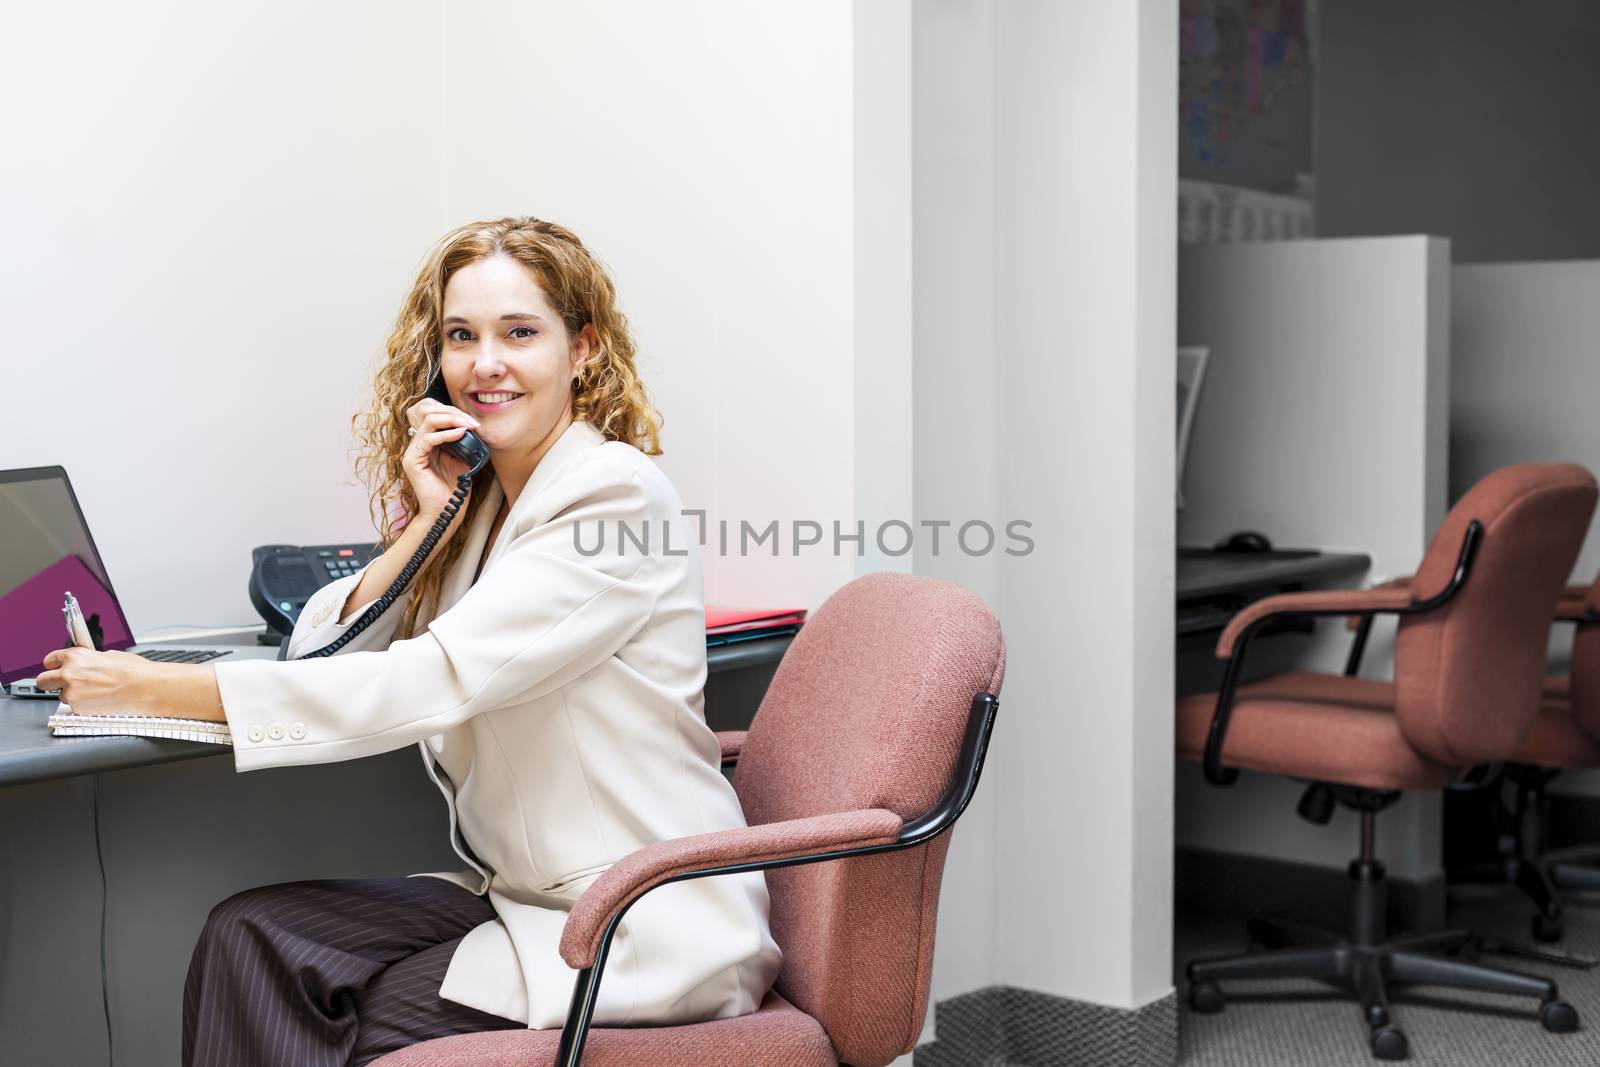 Smiling woman on telephone at office desk by elenathewise